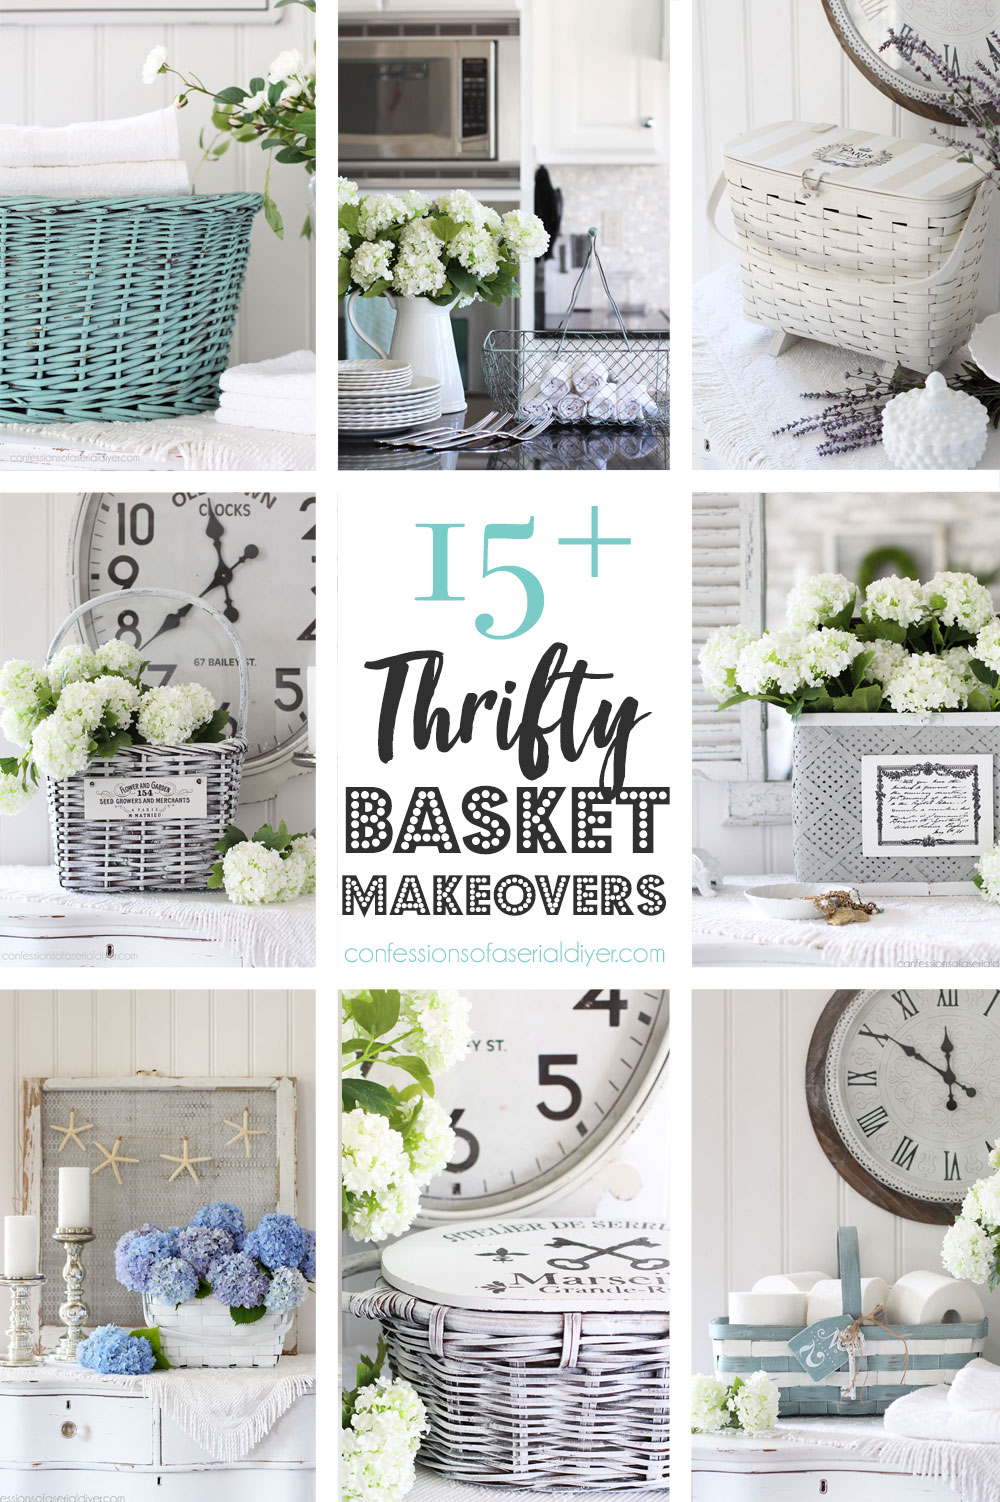 15+ Thrifty Basket Makeovers